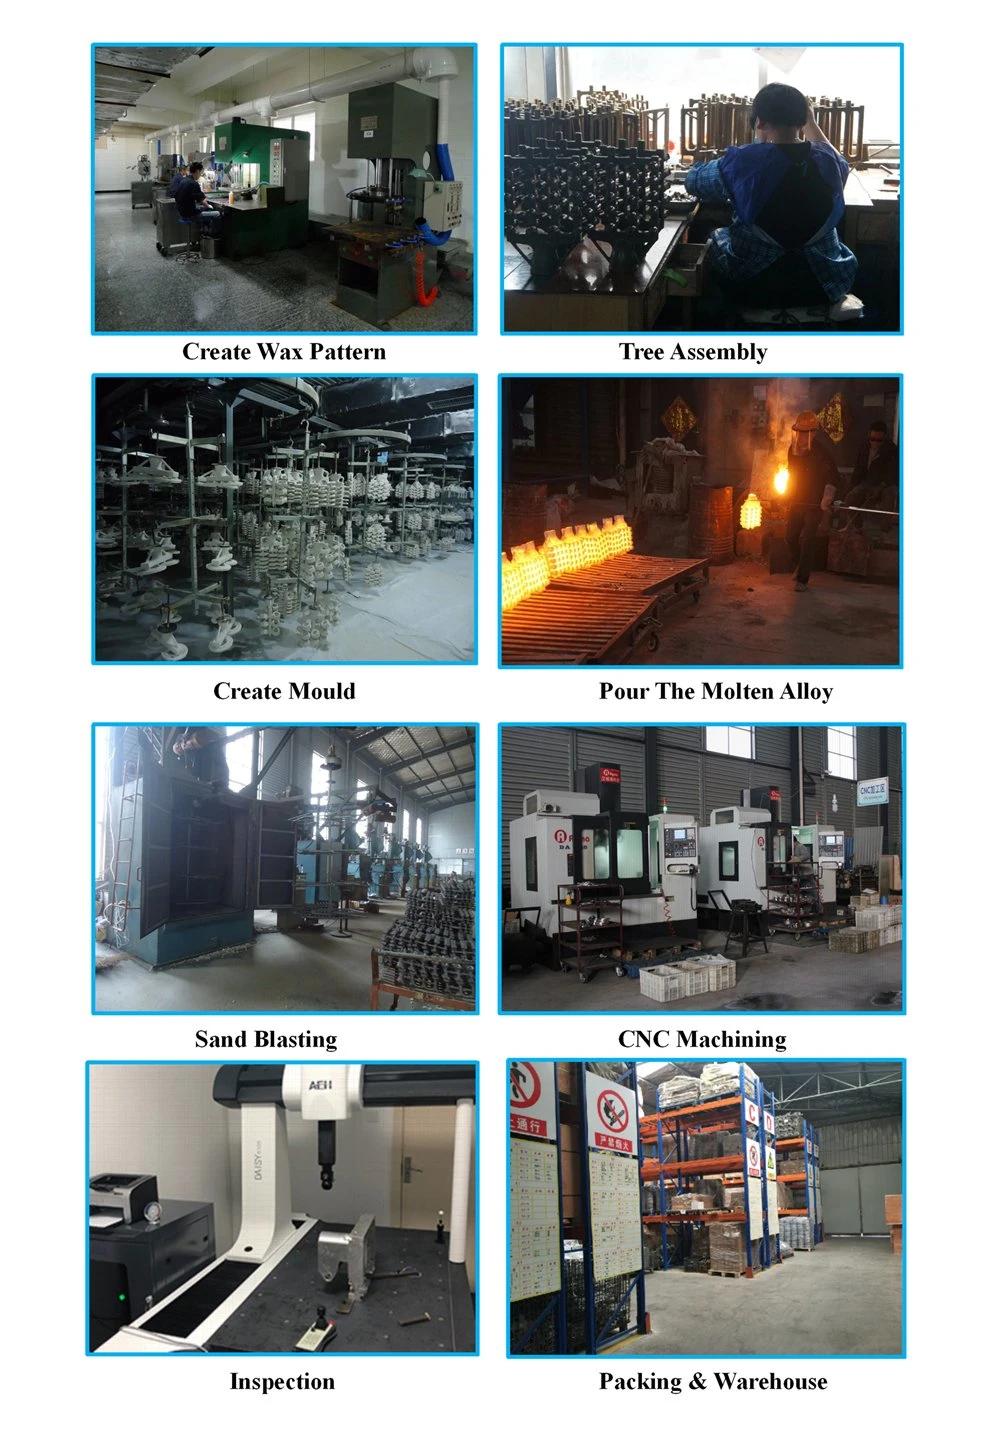 China Stainless Steel Cast Silica Sol Casting/Investment Casting Foundry/Lost Casting Factory